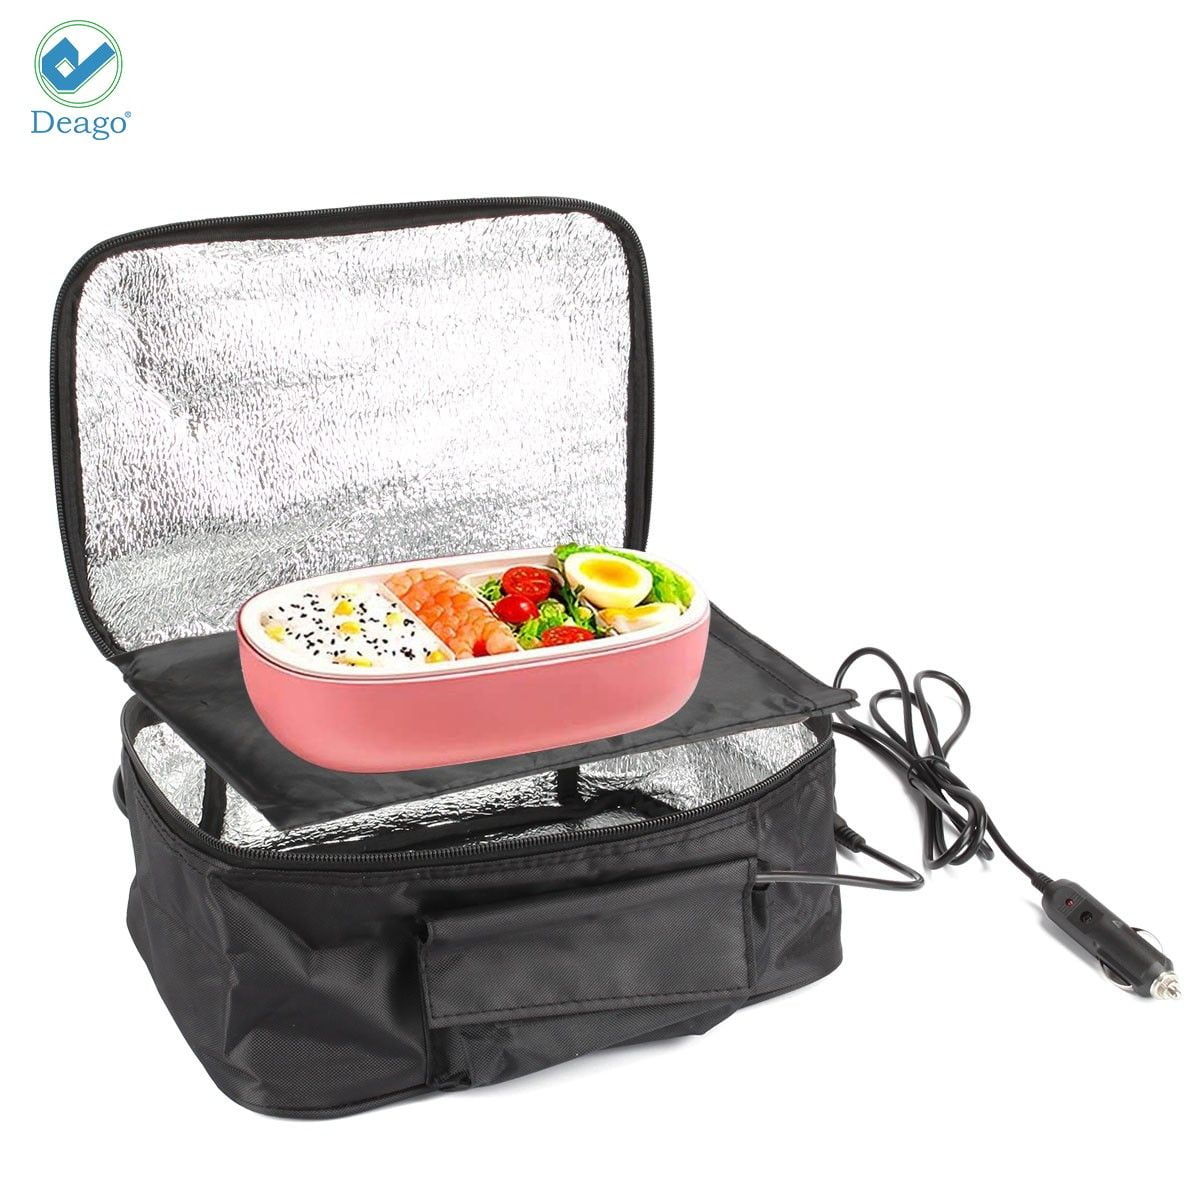 Car Lunch Insulation Boxes Portable Lunch Oven Bag Instant Food Heater Warmer 